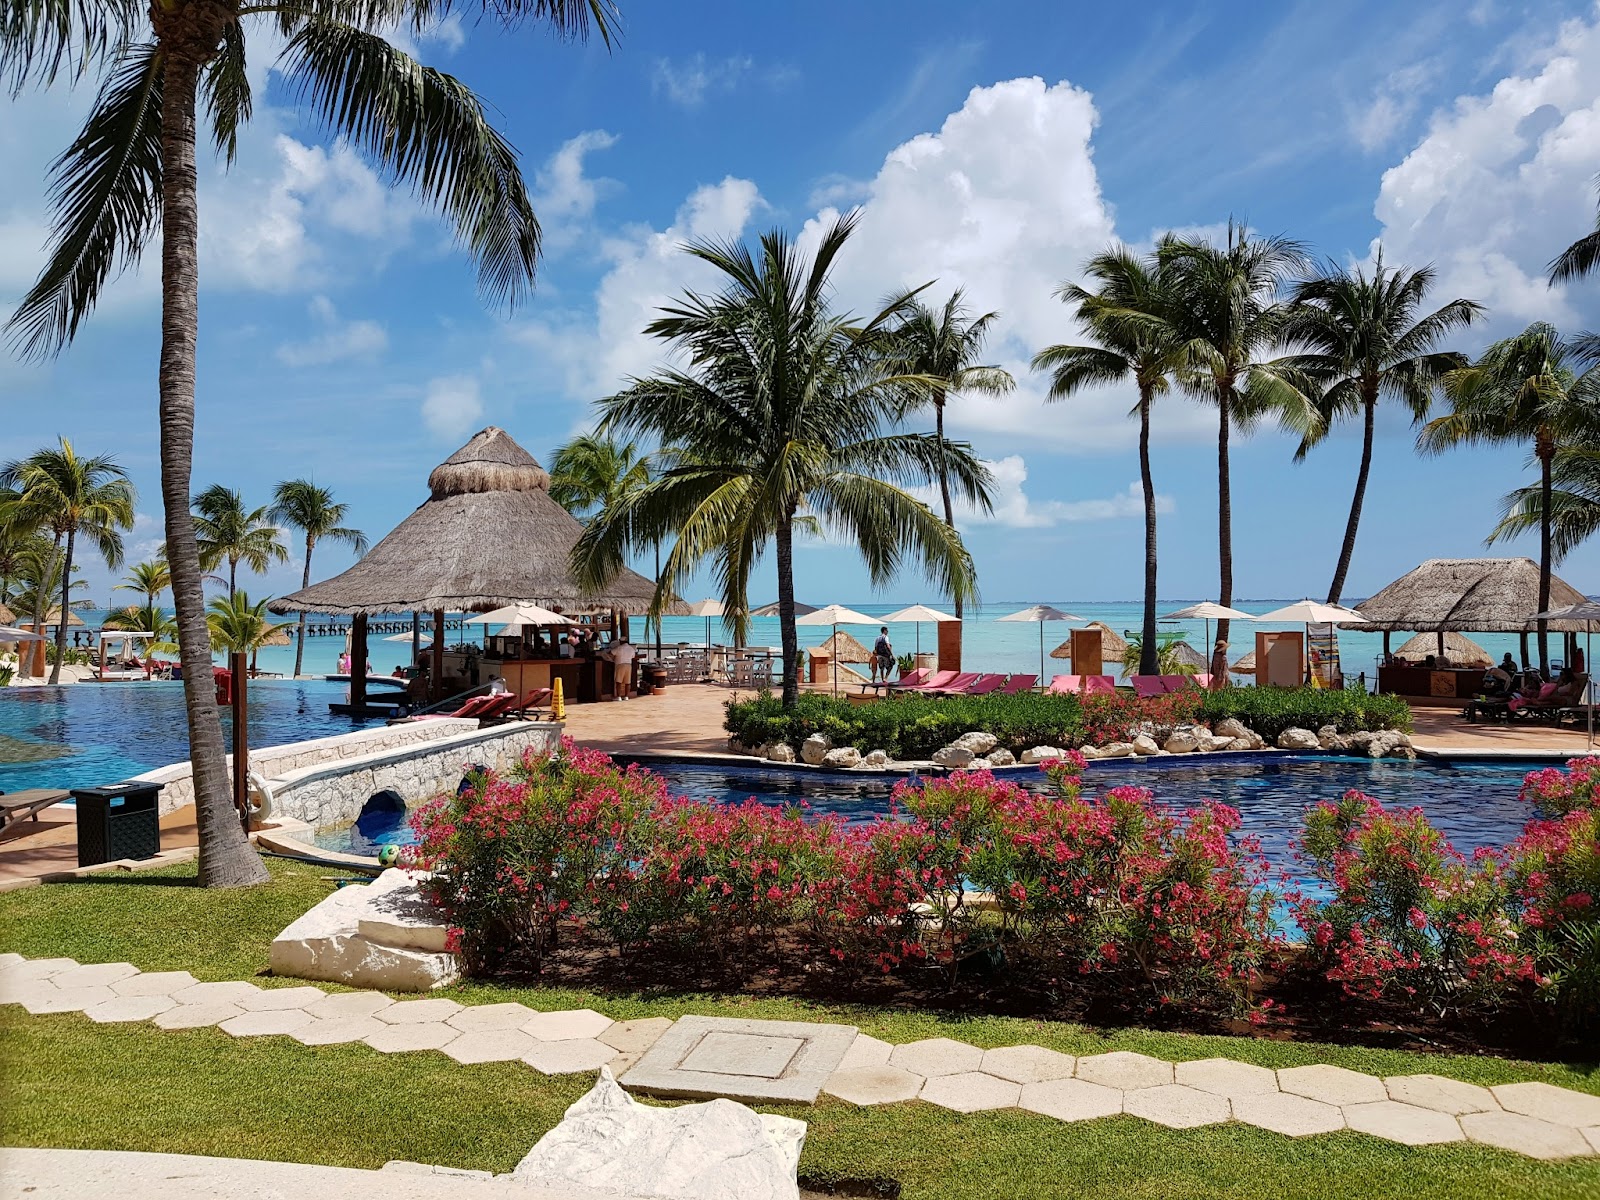 A lavish resort pool with a stunning ocean view, perfect for a romantic getaway in Mexico.